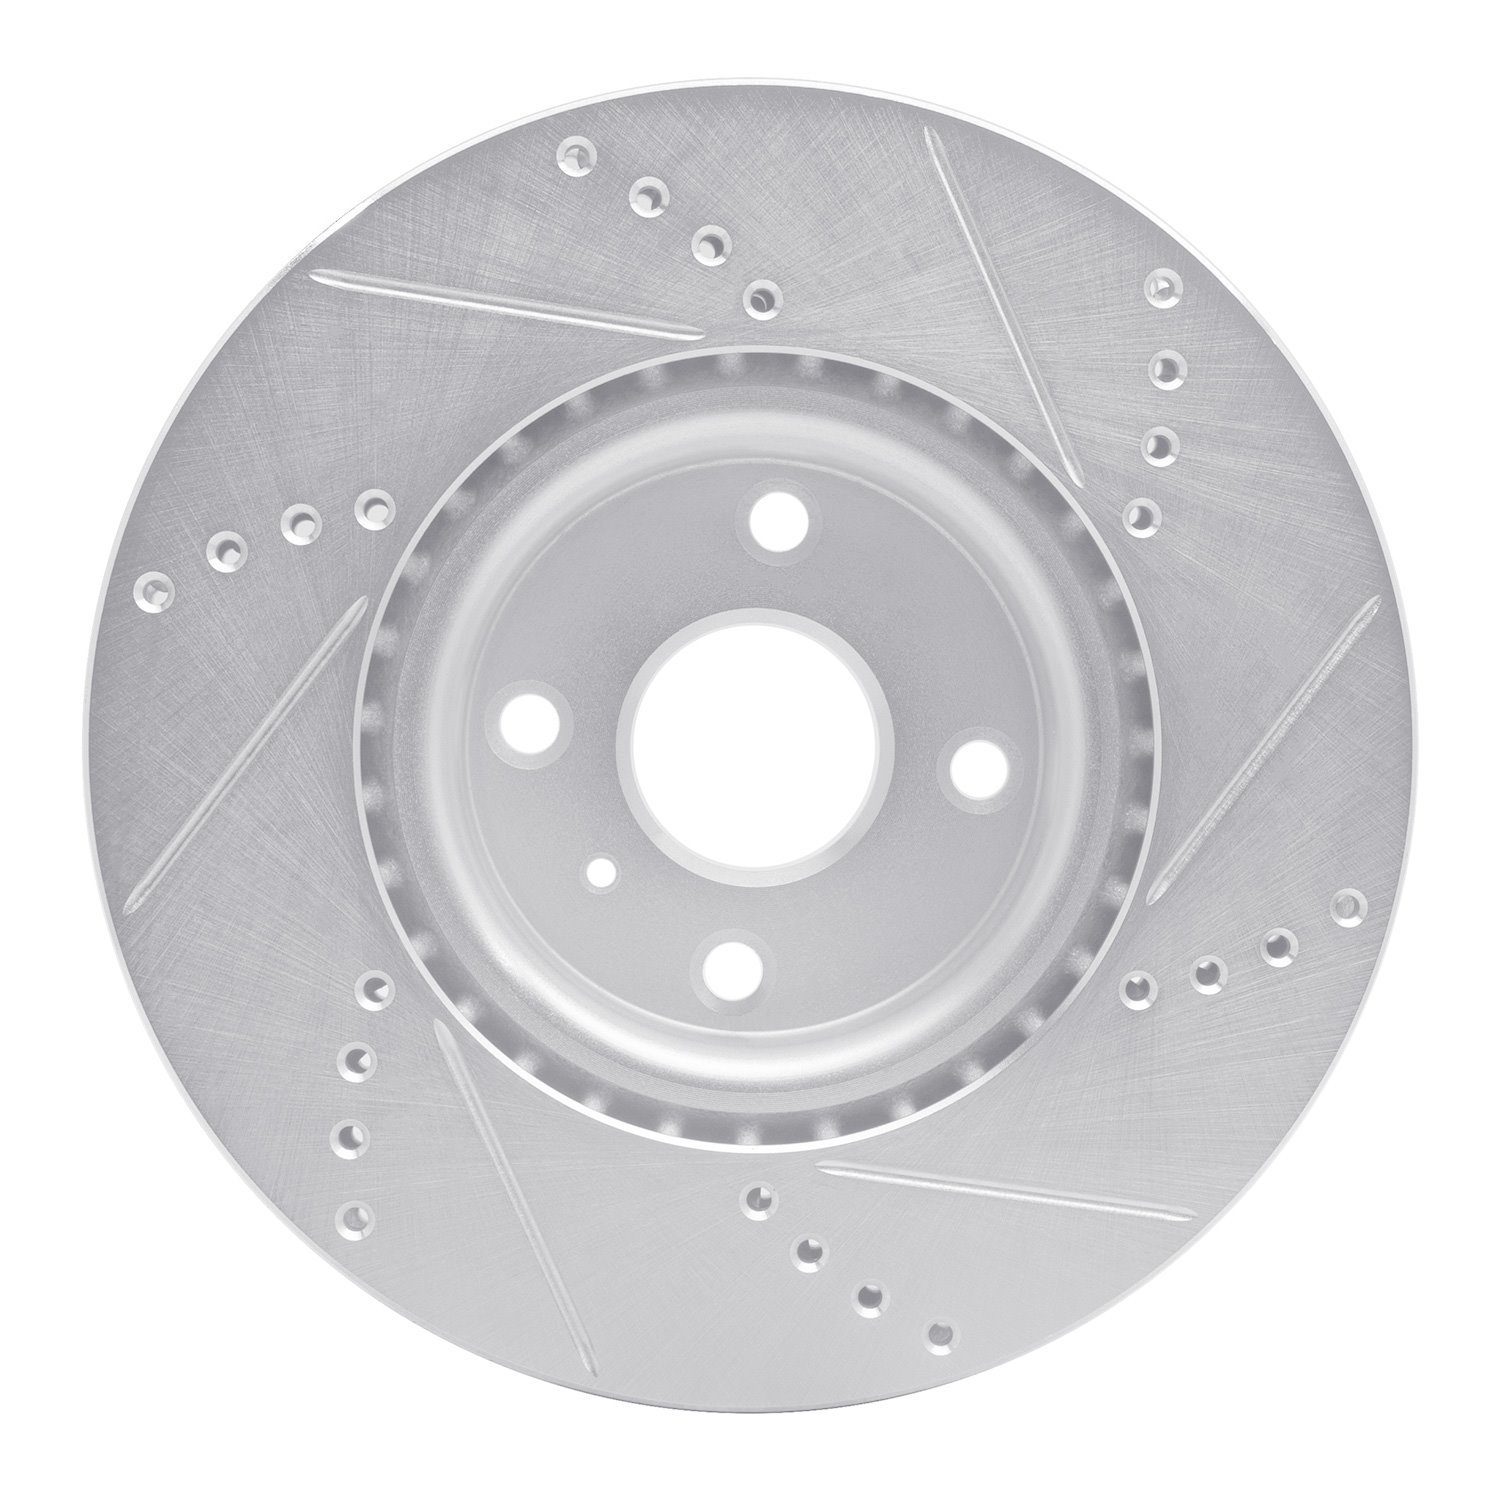 E-Line Drilled & Slotted Silver Brake Rotor, Fits Select Fits Multiple Makes/Models, Position: Front Left